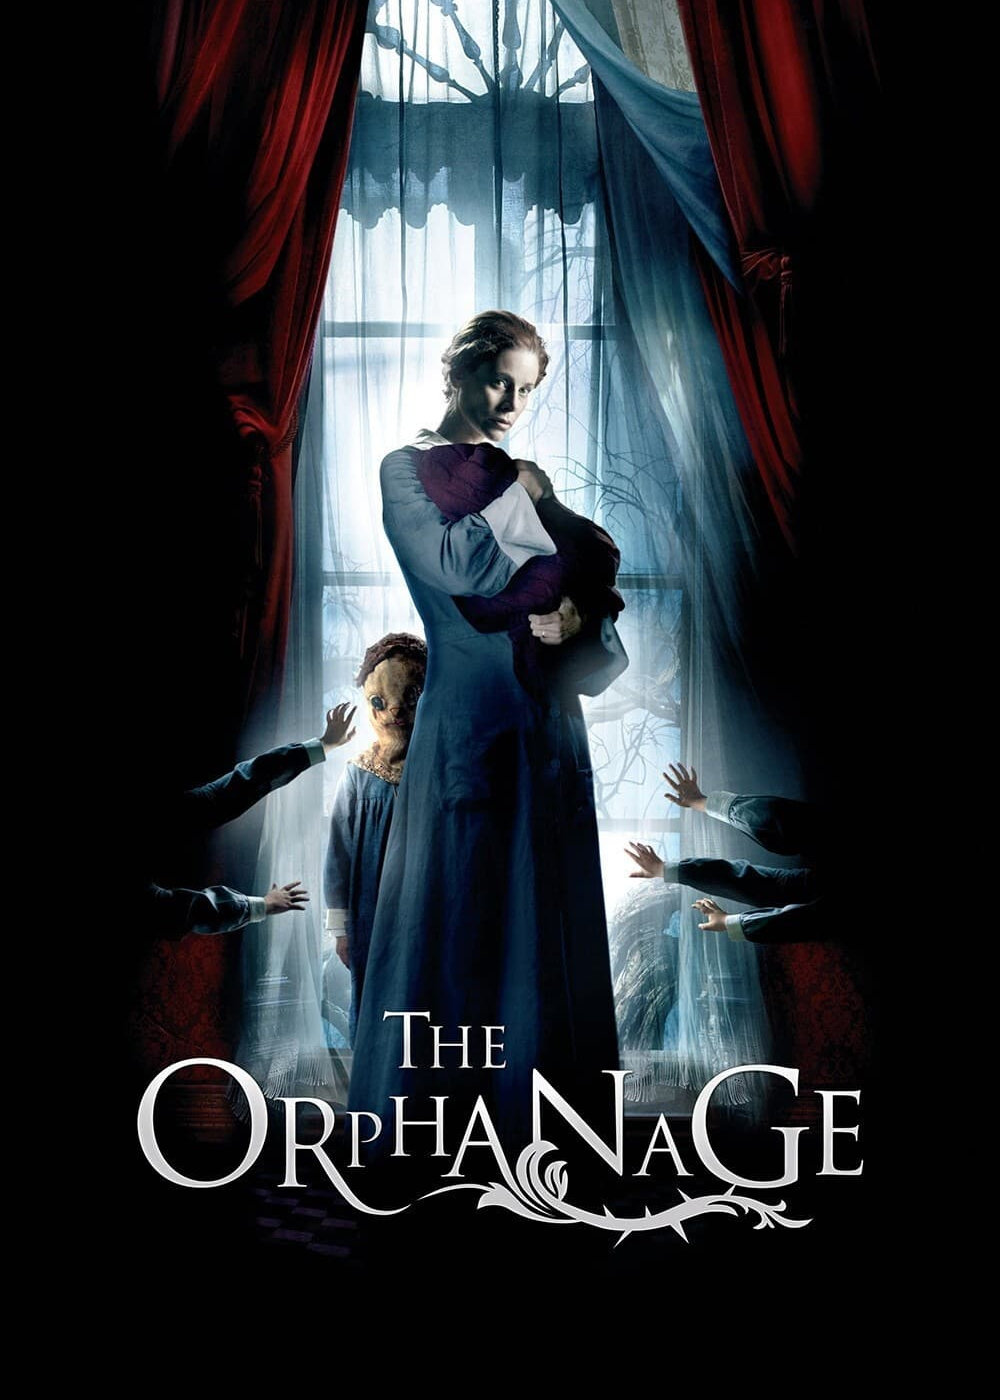 The Orphanage - The Orphanage